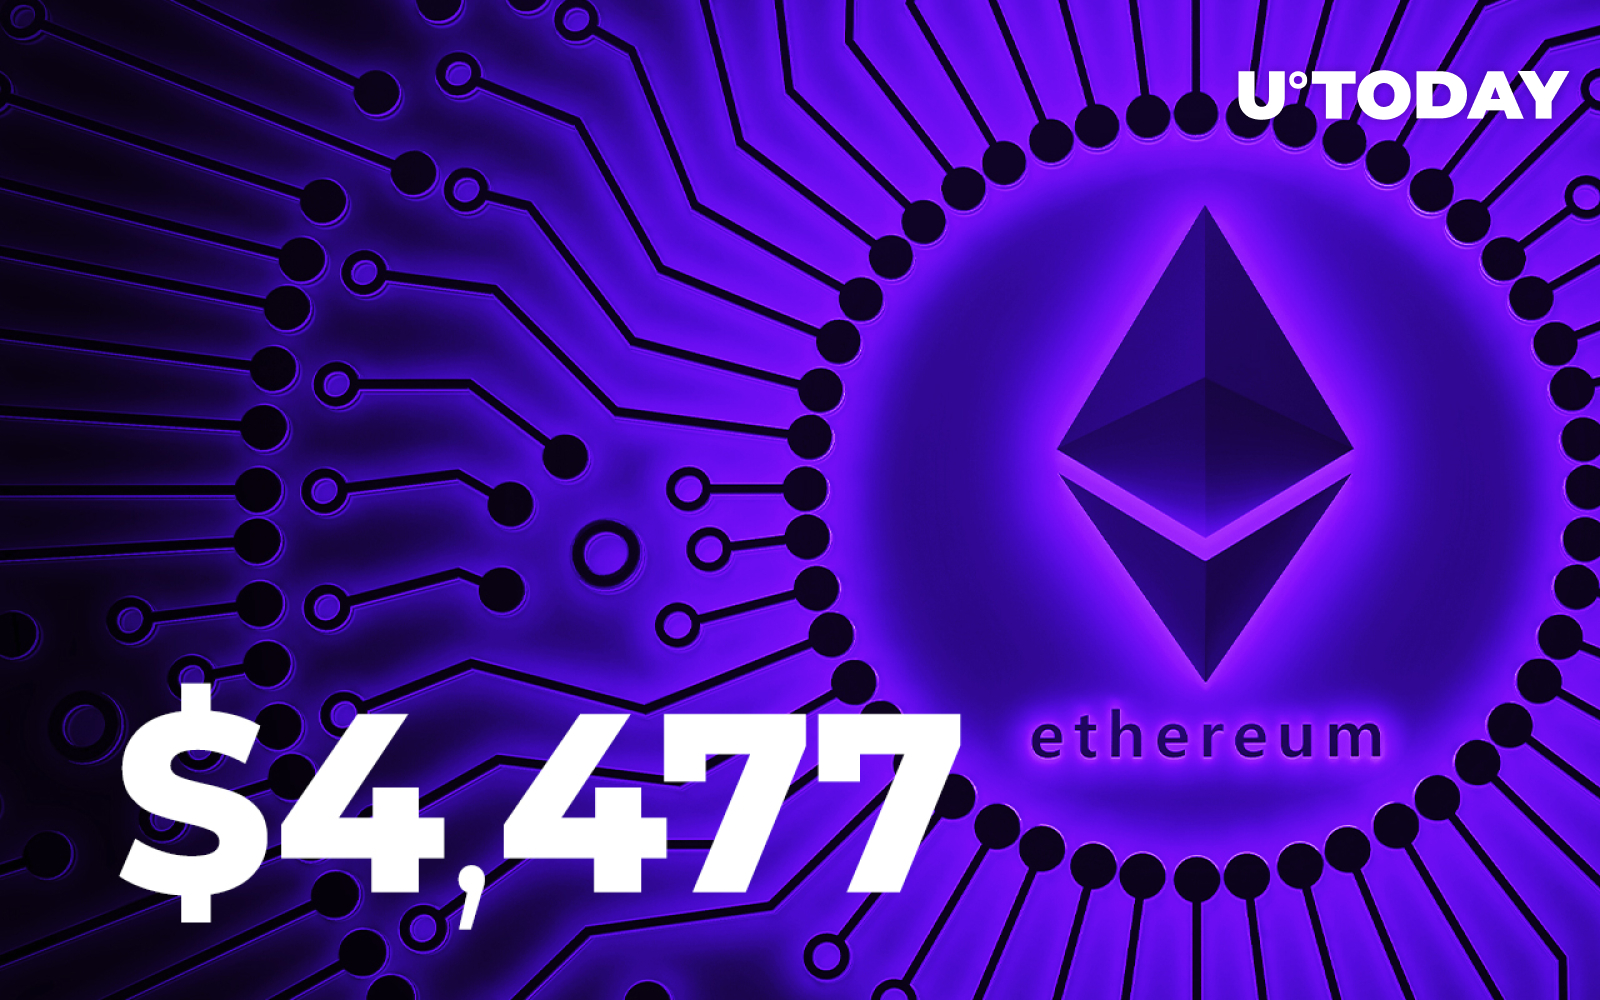 breaking ethereum down into units